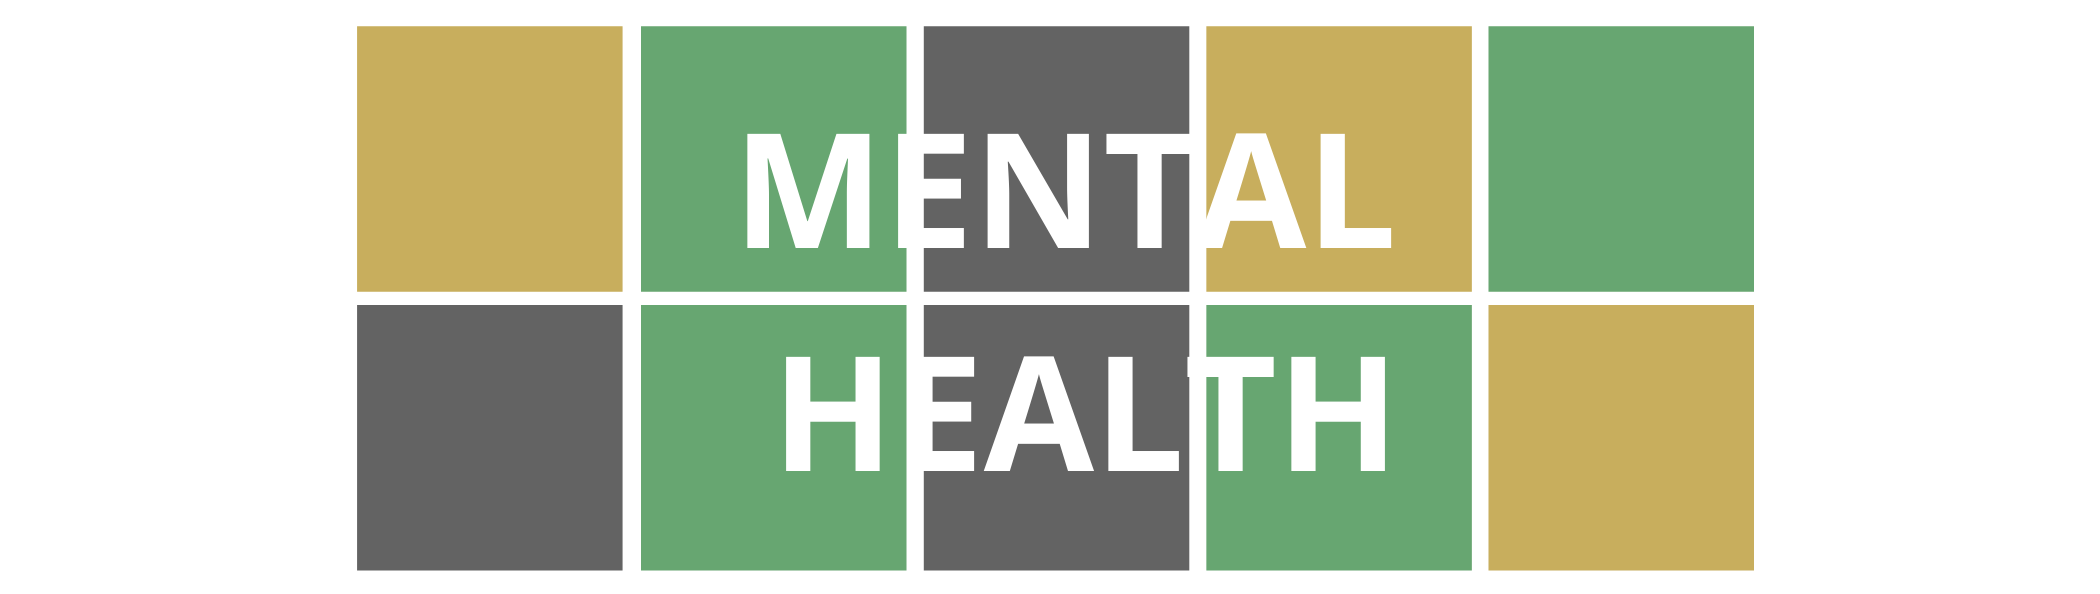 Wordle style colorful blocks with department title of Mental Health that links to page with course offerings. 